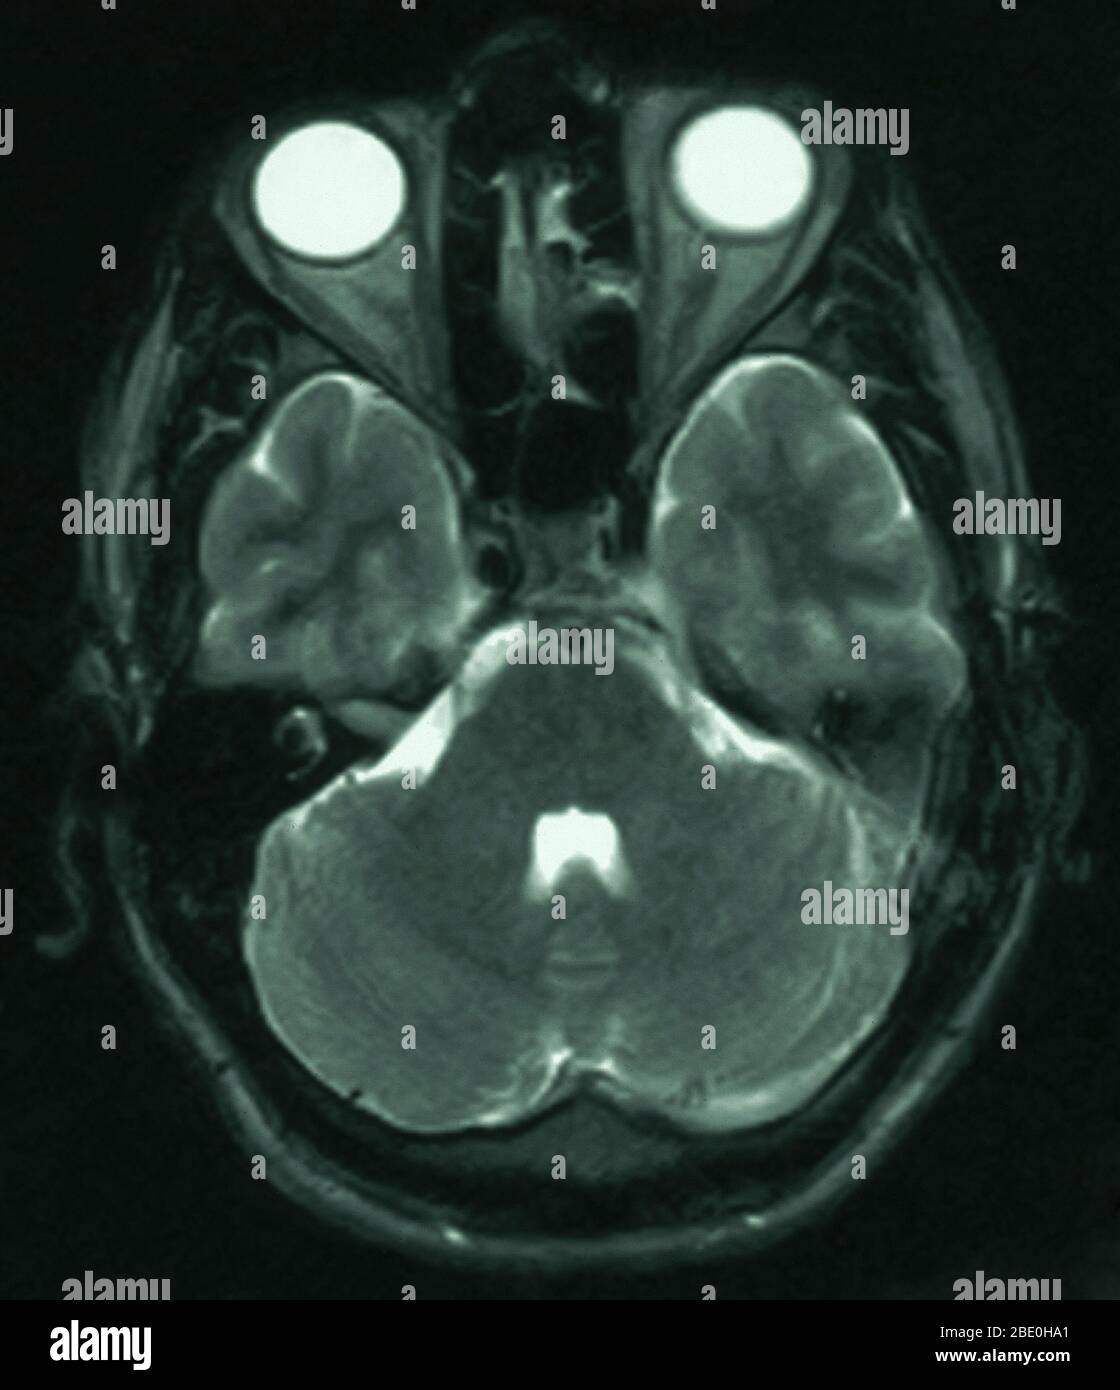 MRI of the brain (axial view) of a 26 year old male. The MRI was taken as a result of head injury in a car accident. Diagnosis from the MRI's is a small arachnoid cyst in the parasagittal anterior left frontal region. The cyst is not seen in this particular view since it is below the effected region. All other aspects appear normal. Stock Photo